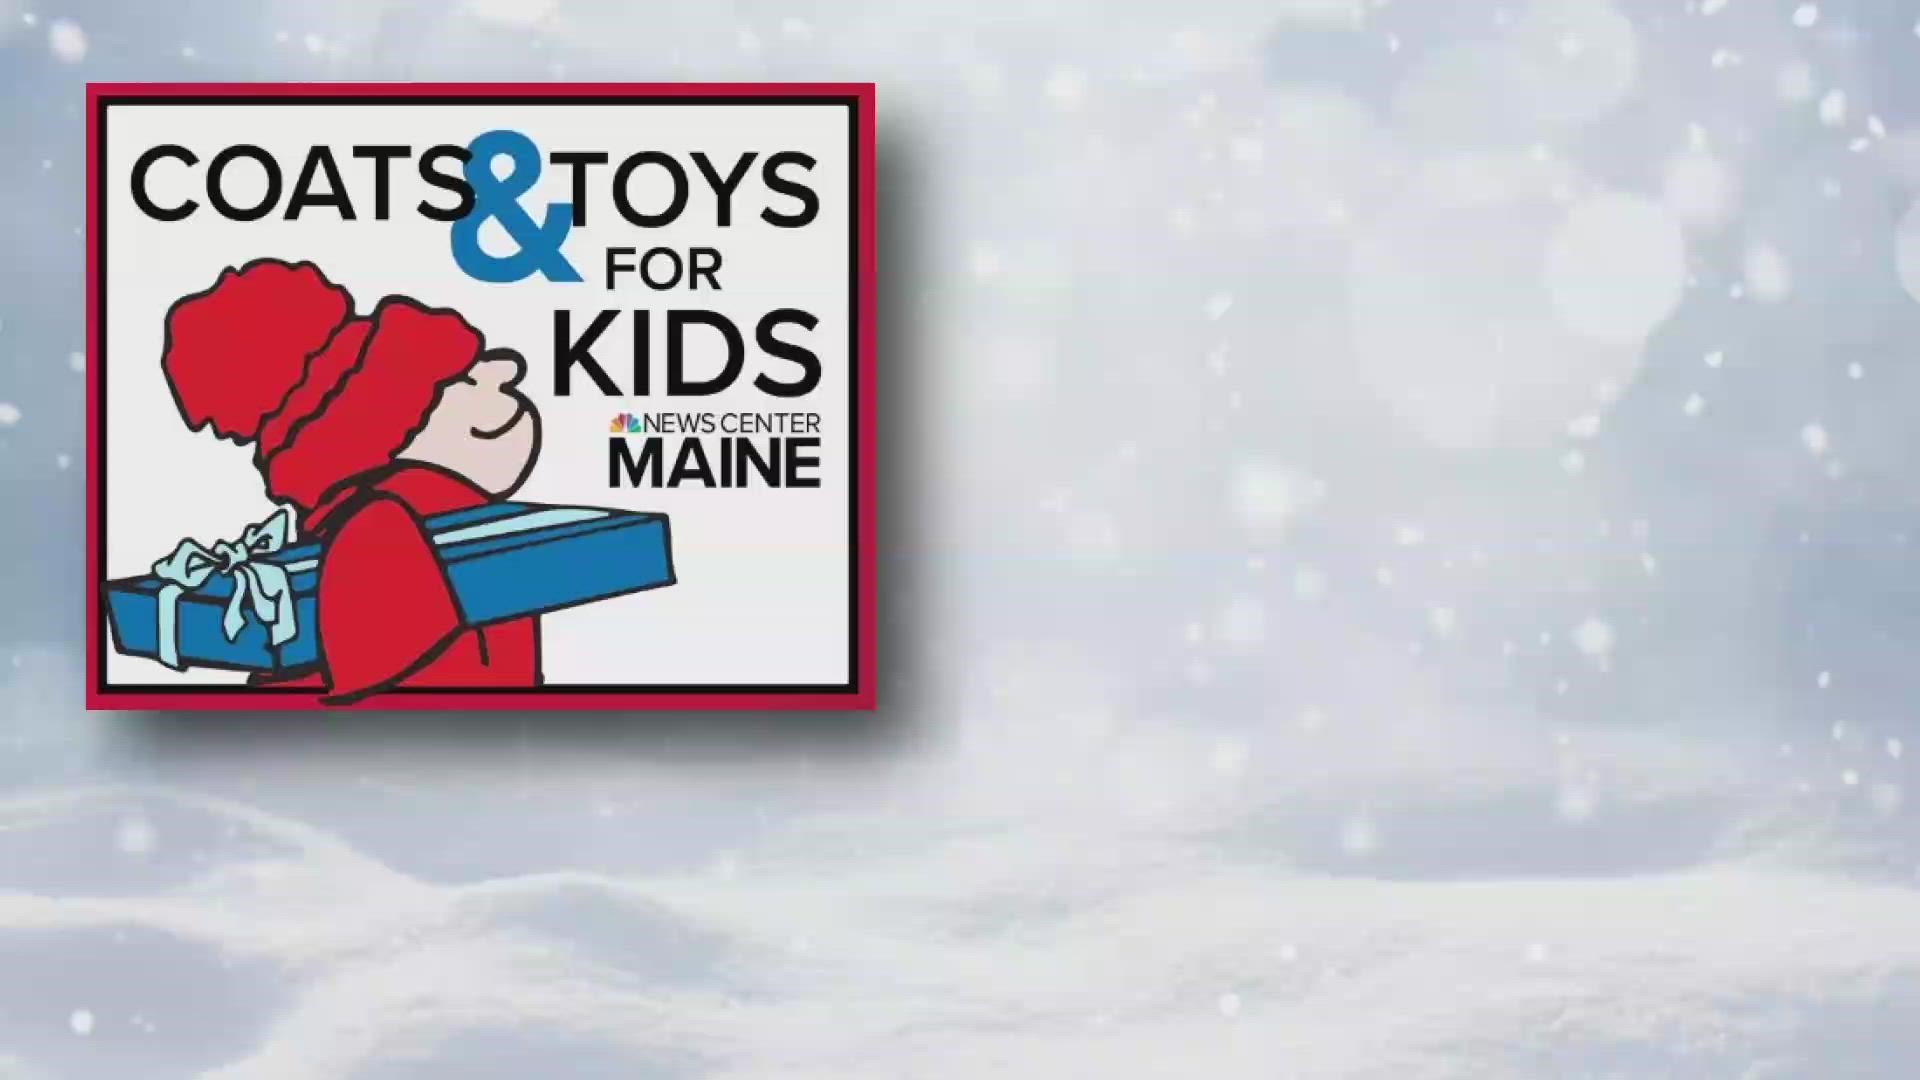 The final numbers are in: More than 14,000 coats and 3,250 toys were donated this year, thanks to you.